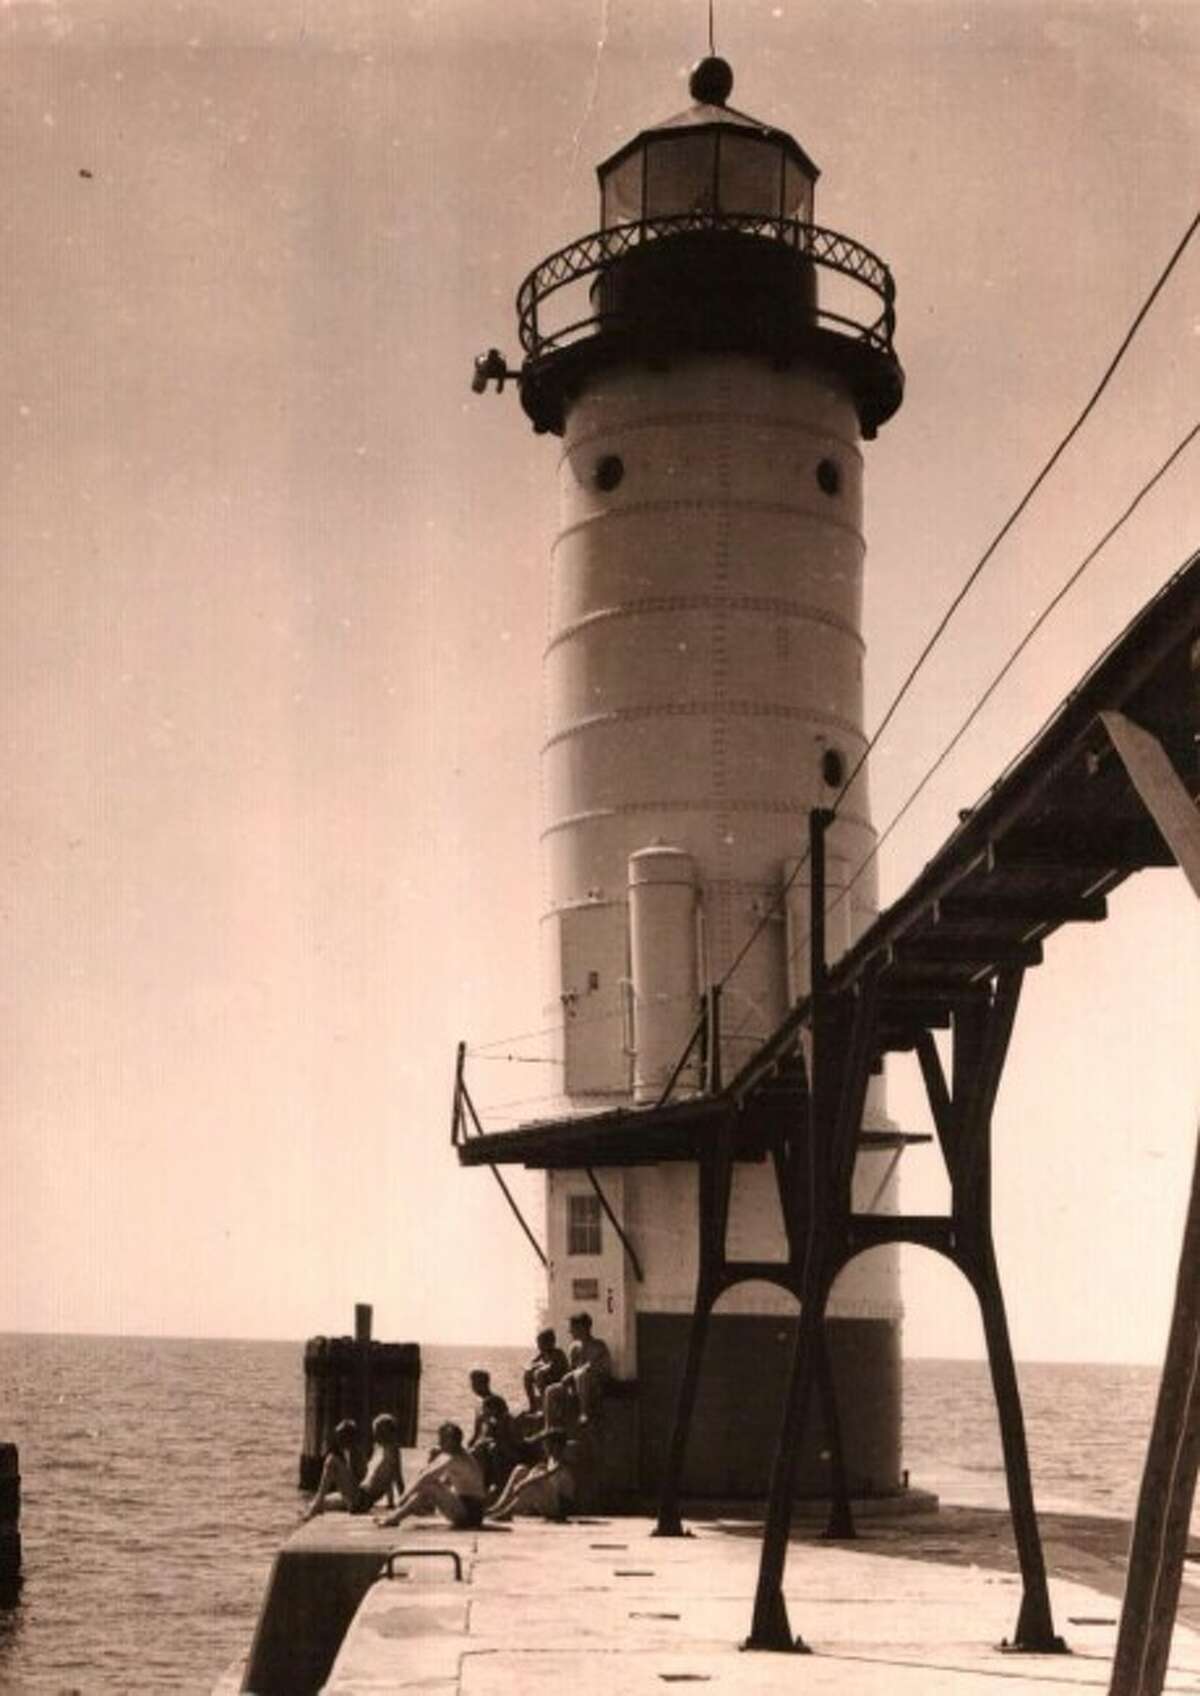 The Manistee North Pierhead Lighthouse circa 1940. Work on restoring the lighthouse is currently underway.